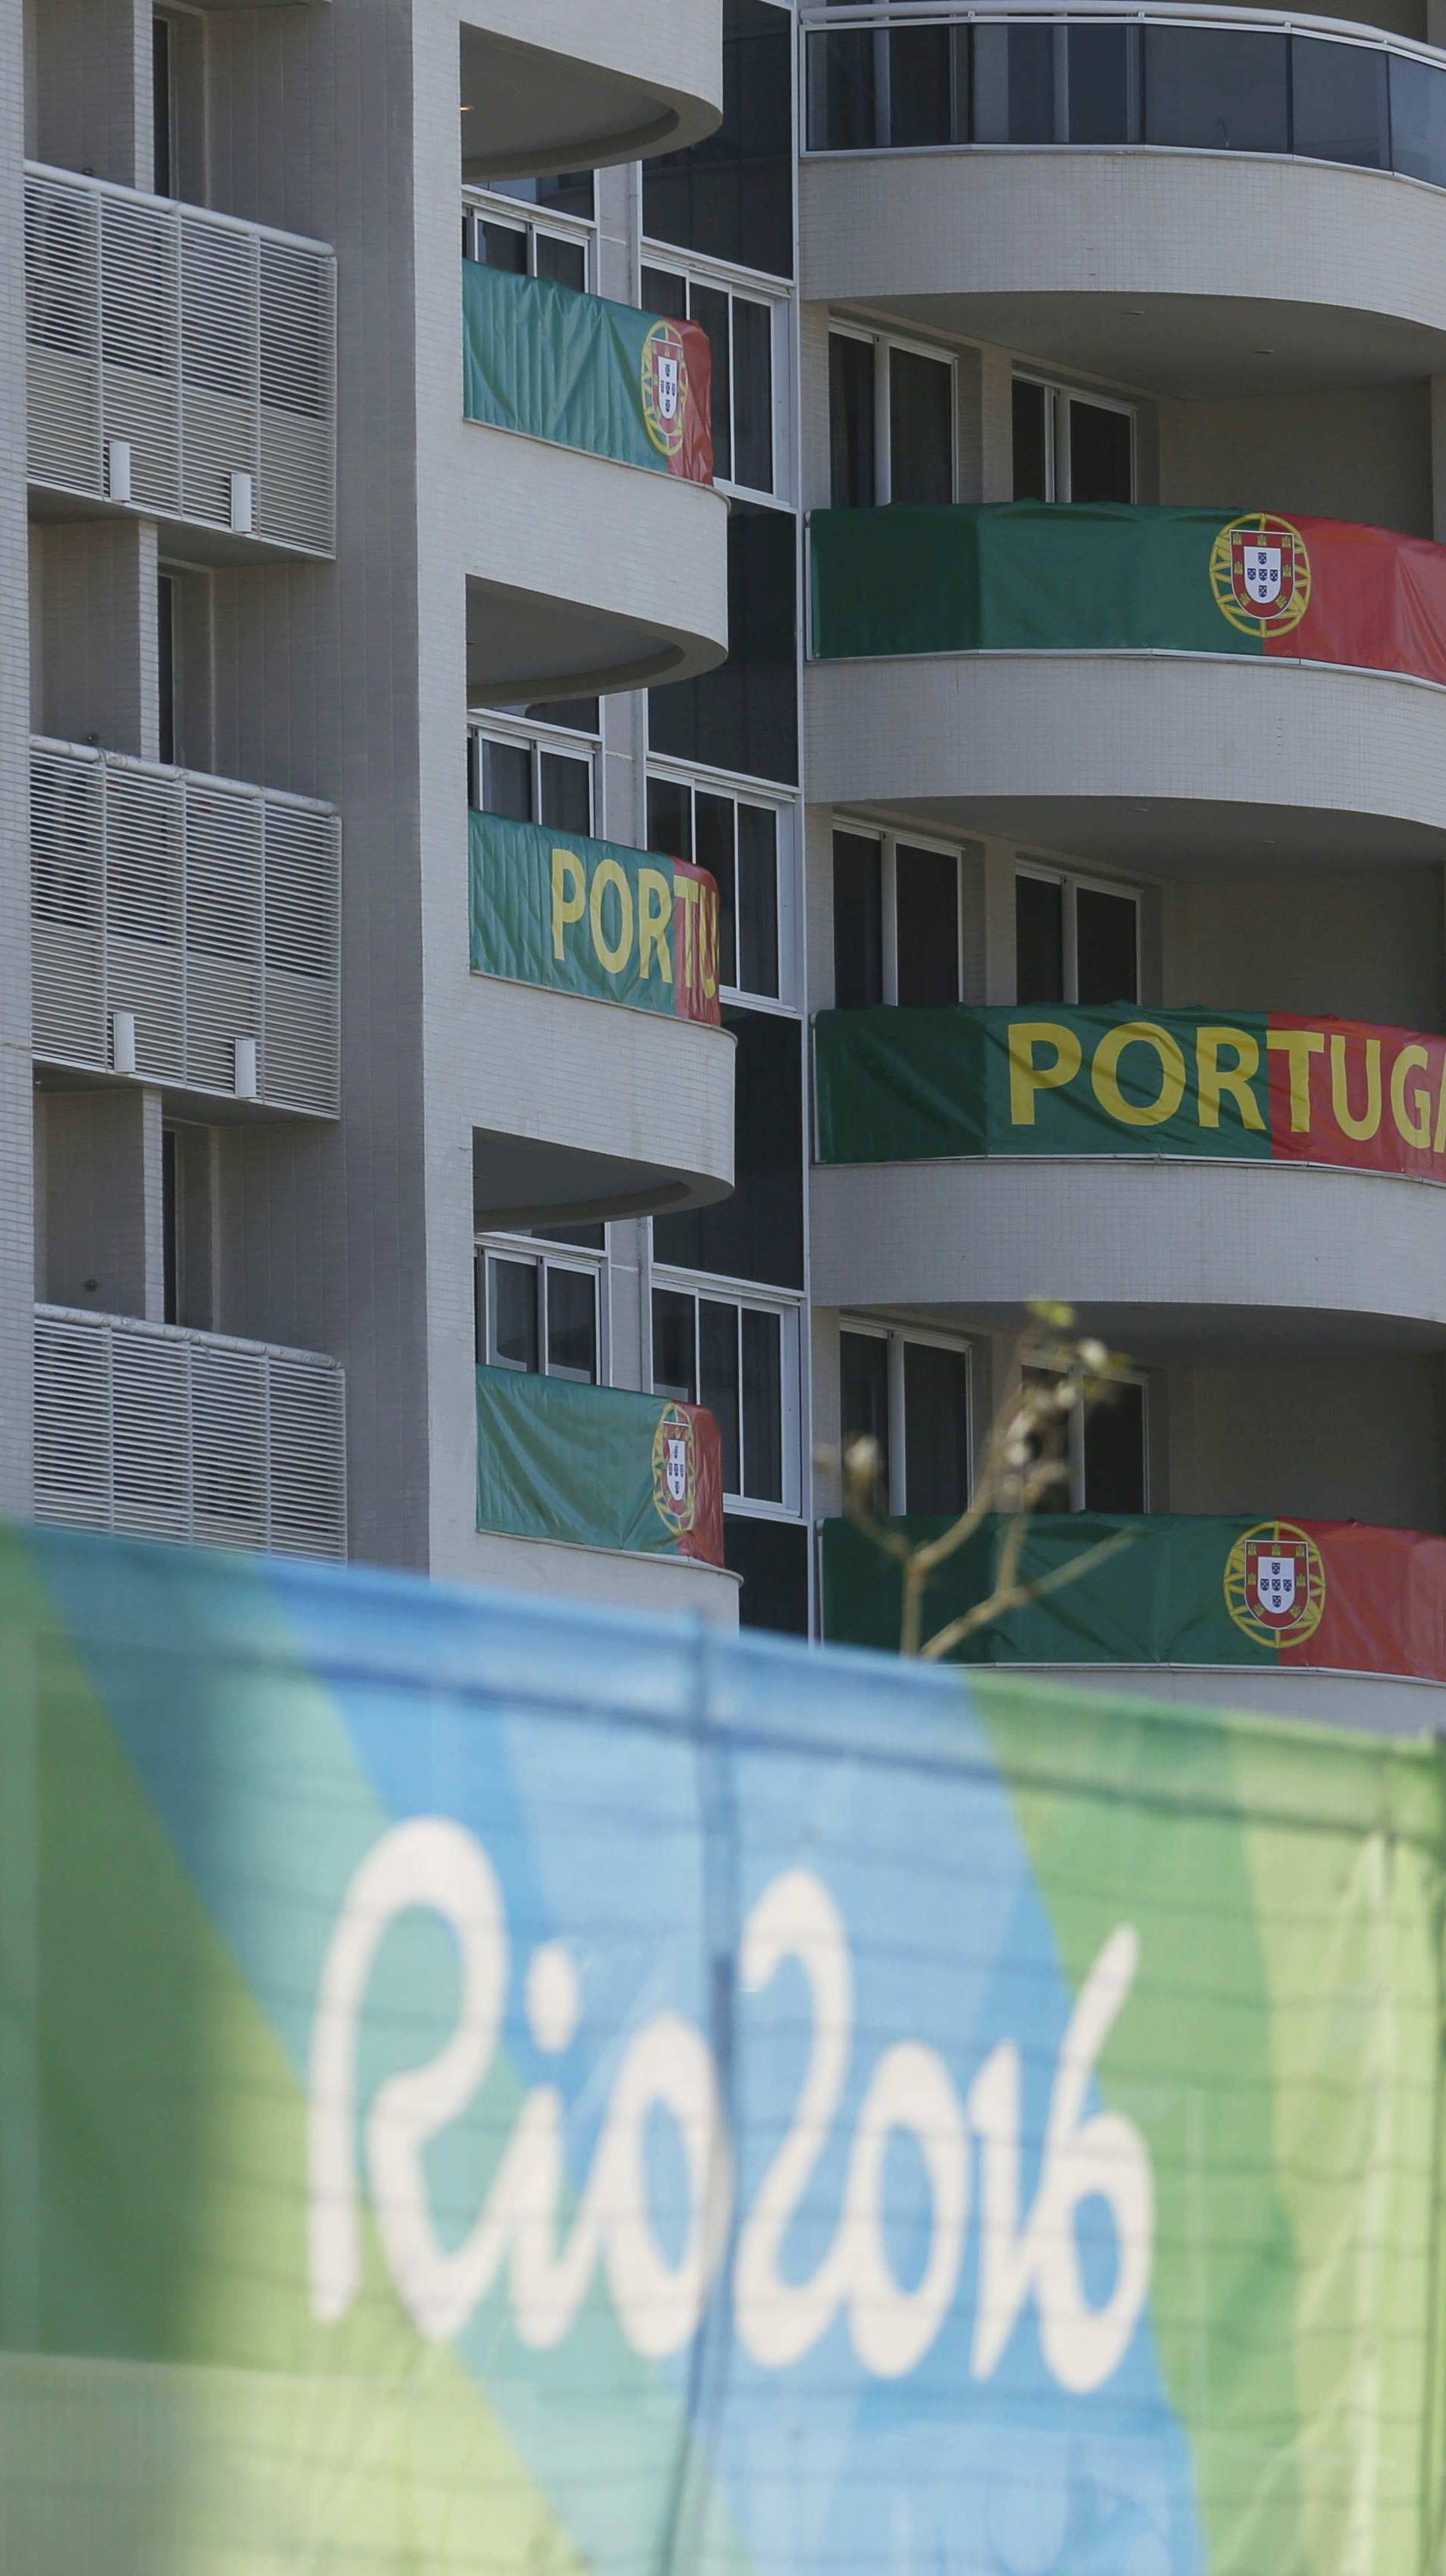 A view of one of the blocks of apartments where Portugal's athletes are supposed to stay in Rio de Janeiro